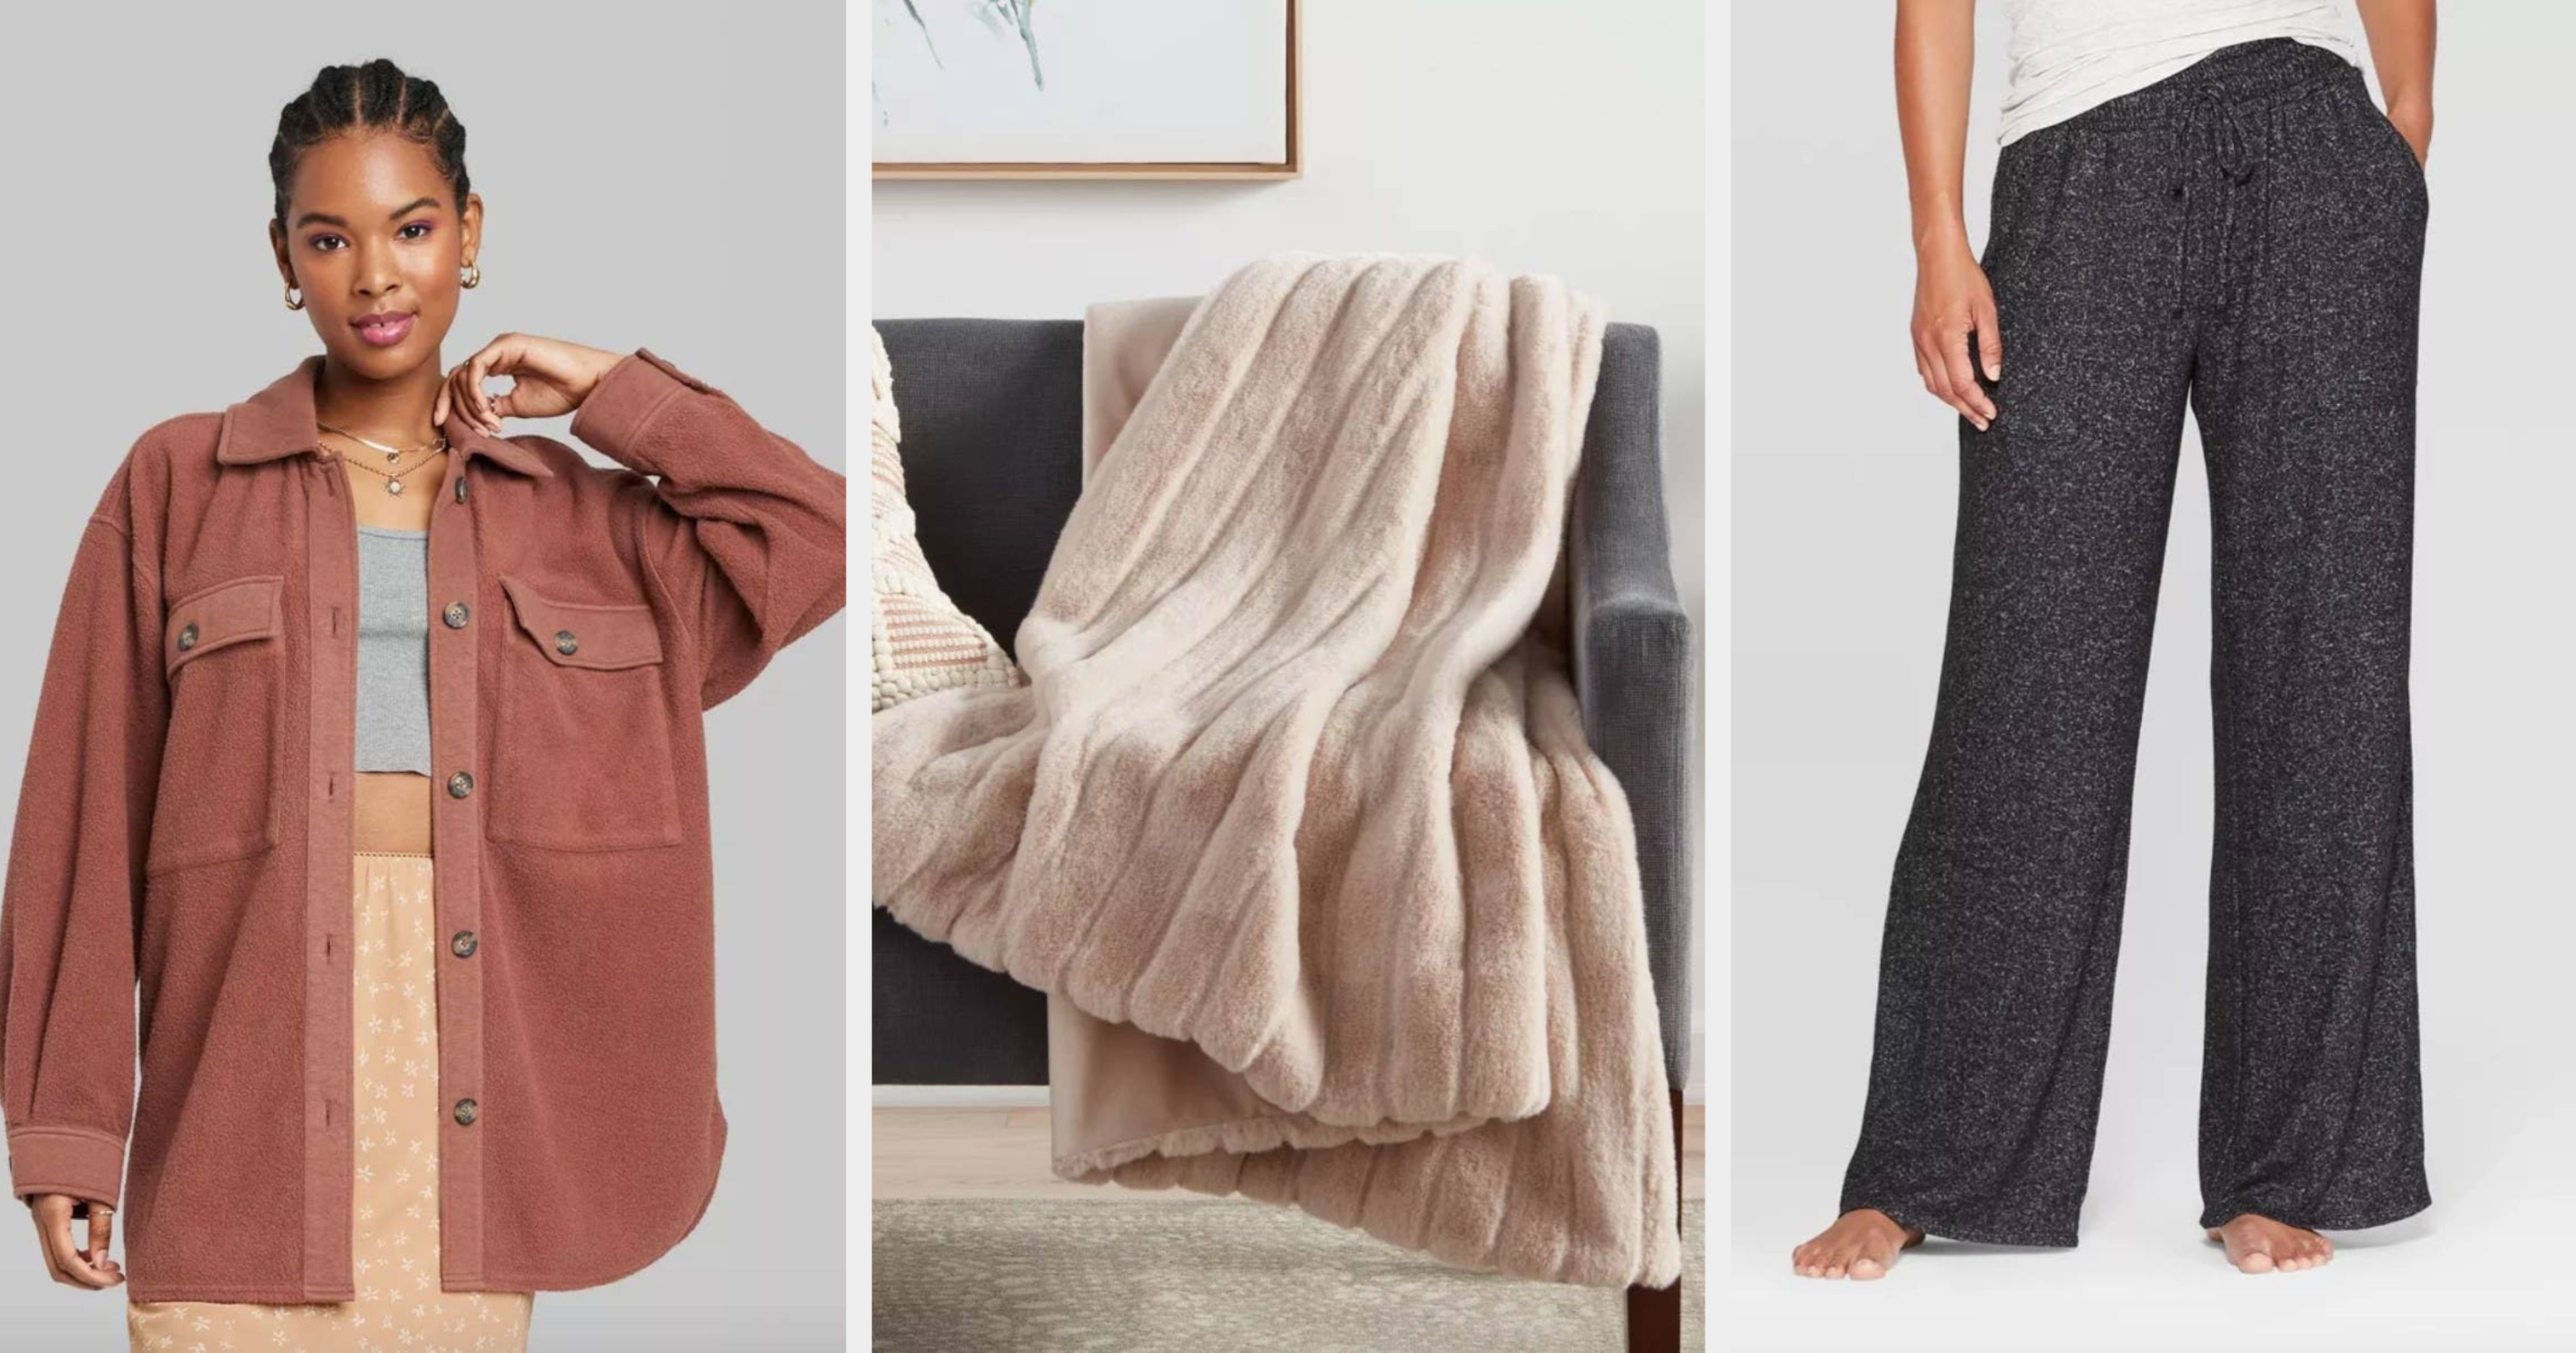 26 Target Products To Help Make 2023 The Comfiest Year